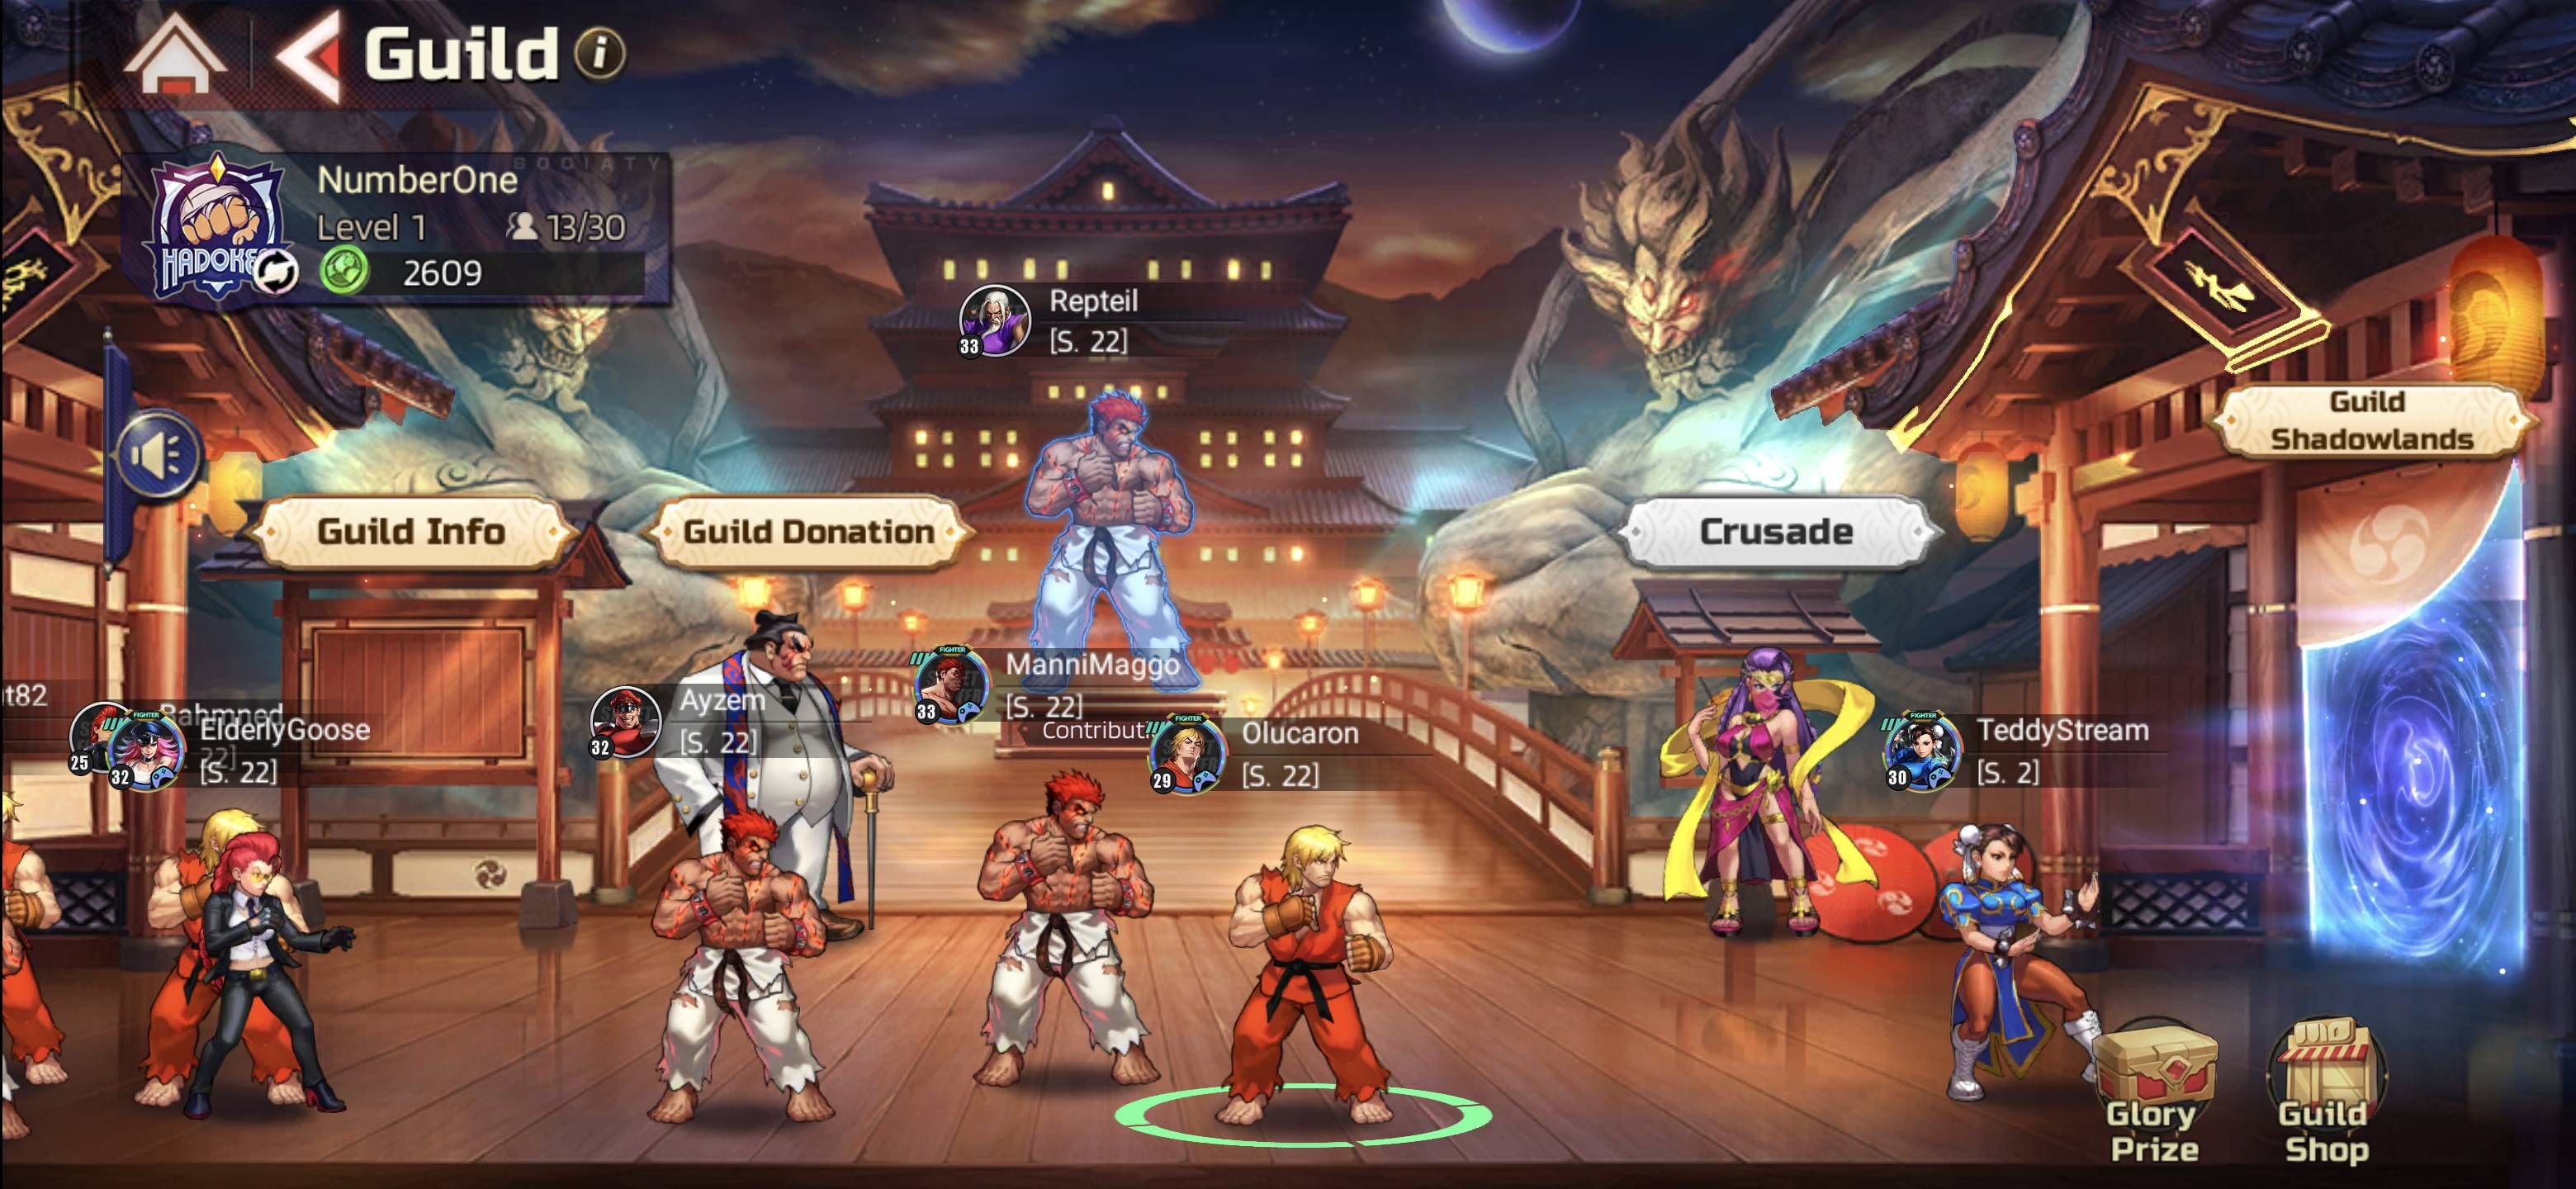 Guild screen in Street Fighter: Duel showing various player avatars in a dojo.